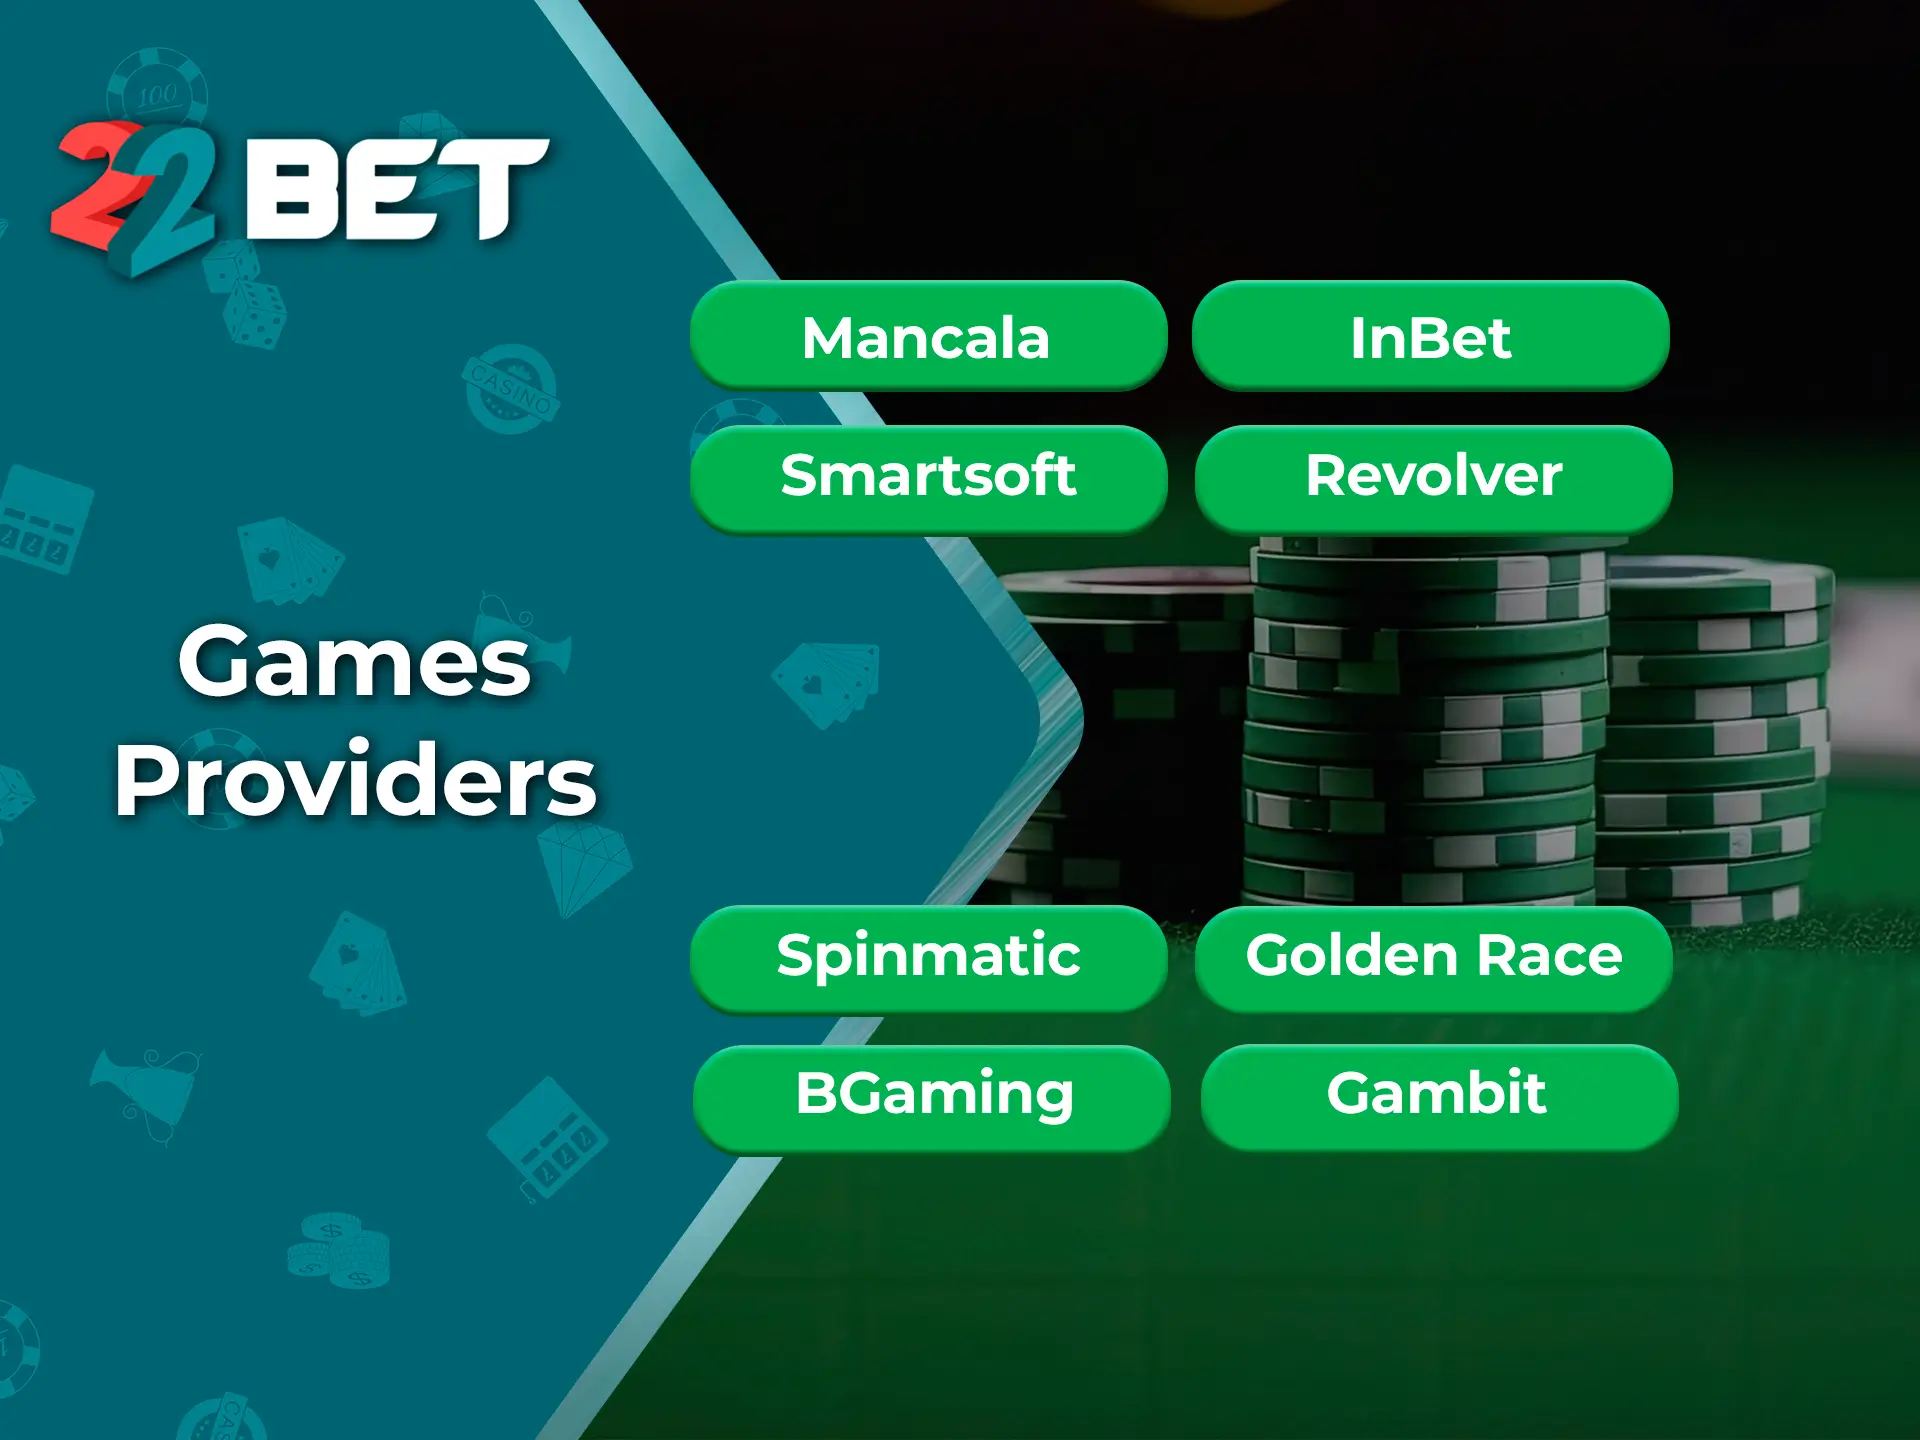 The variety of game providers at 22Bet allows players to change games regularly and win.